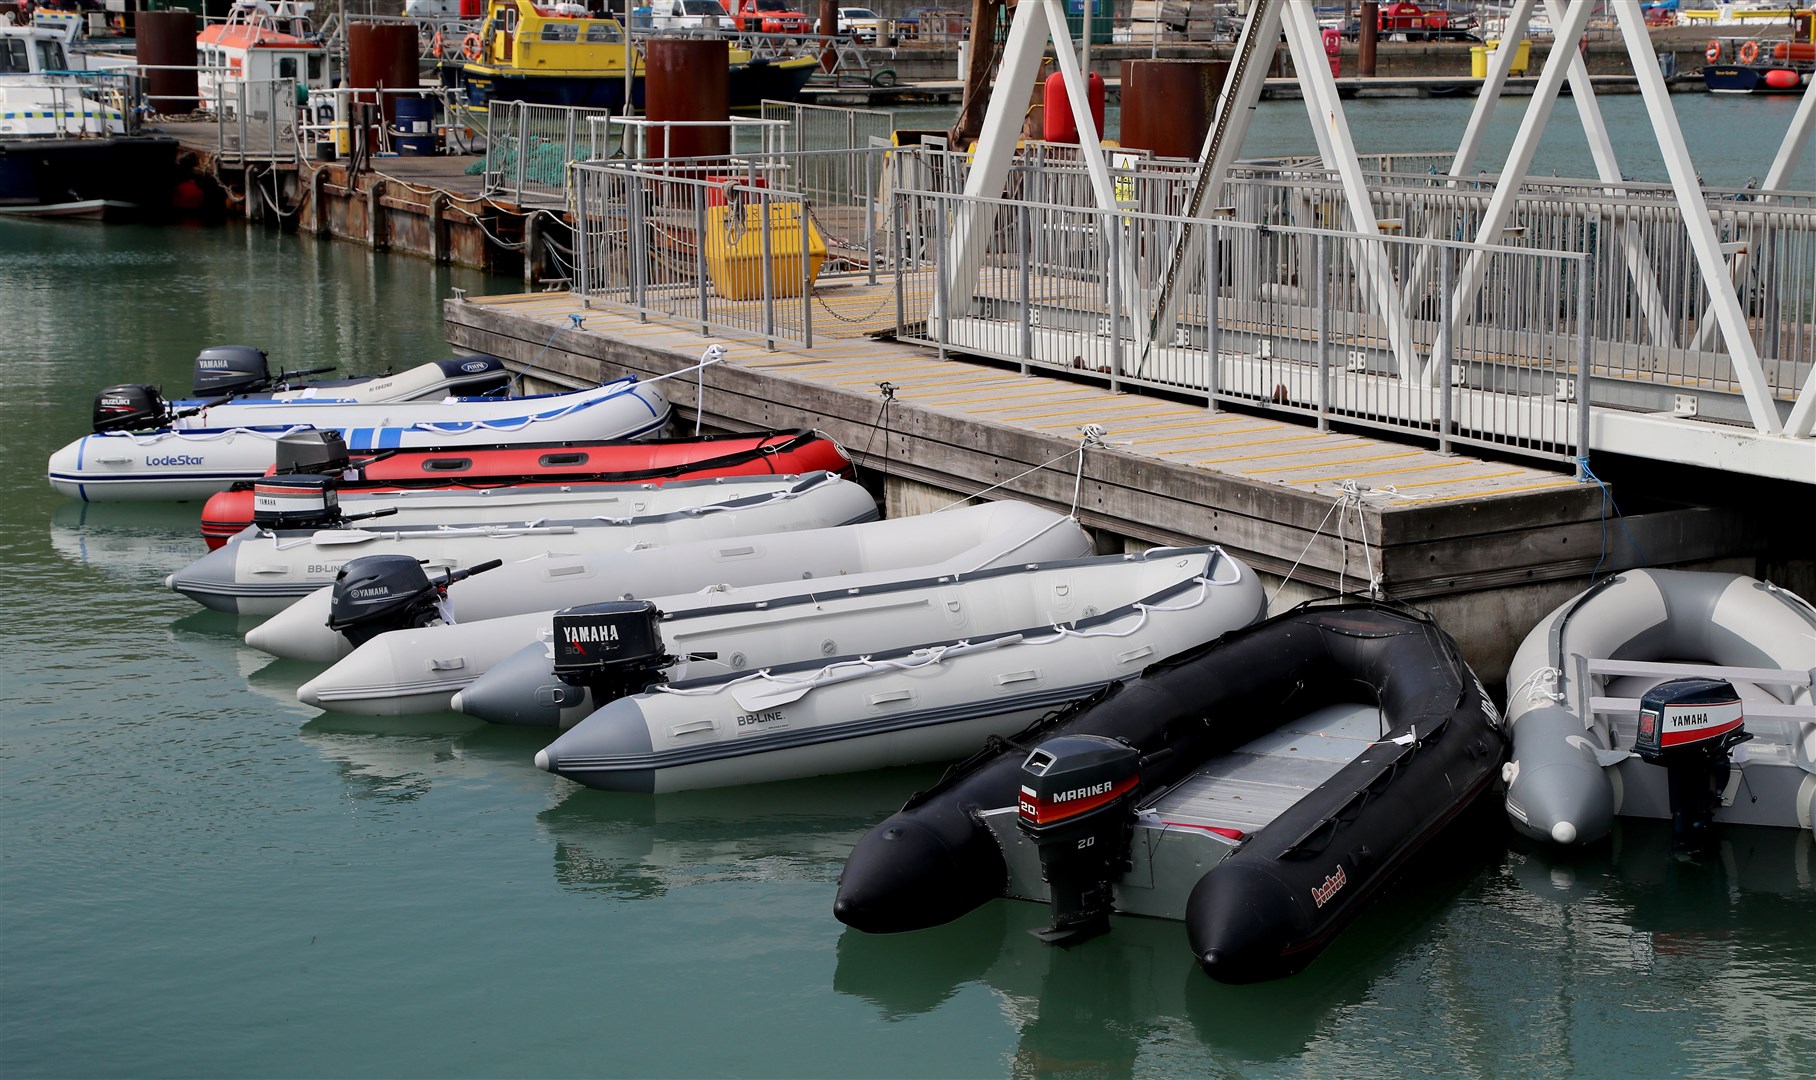 A view of dinghies tied up at The Port of Dover in Kent following being seized by Border Force officers